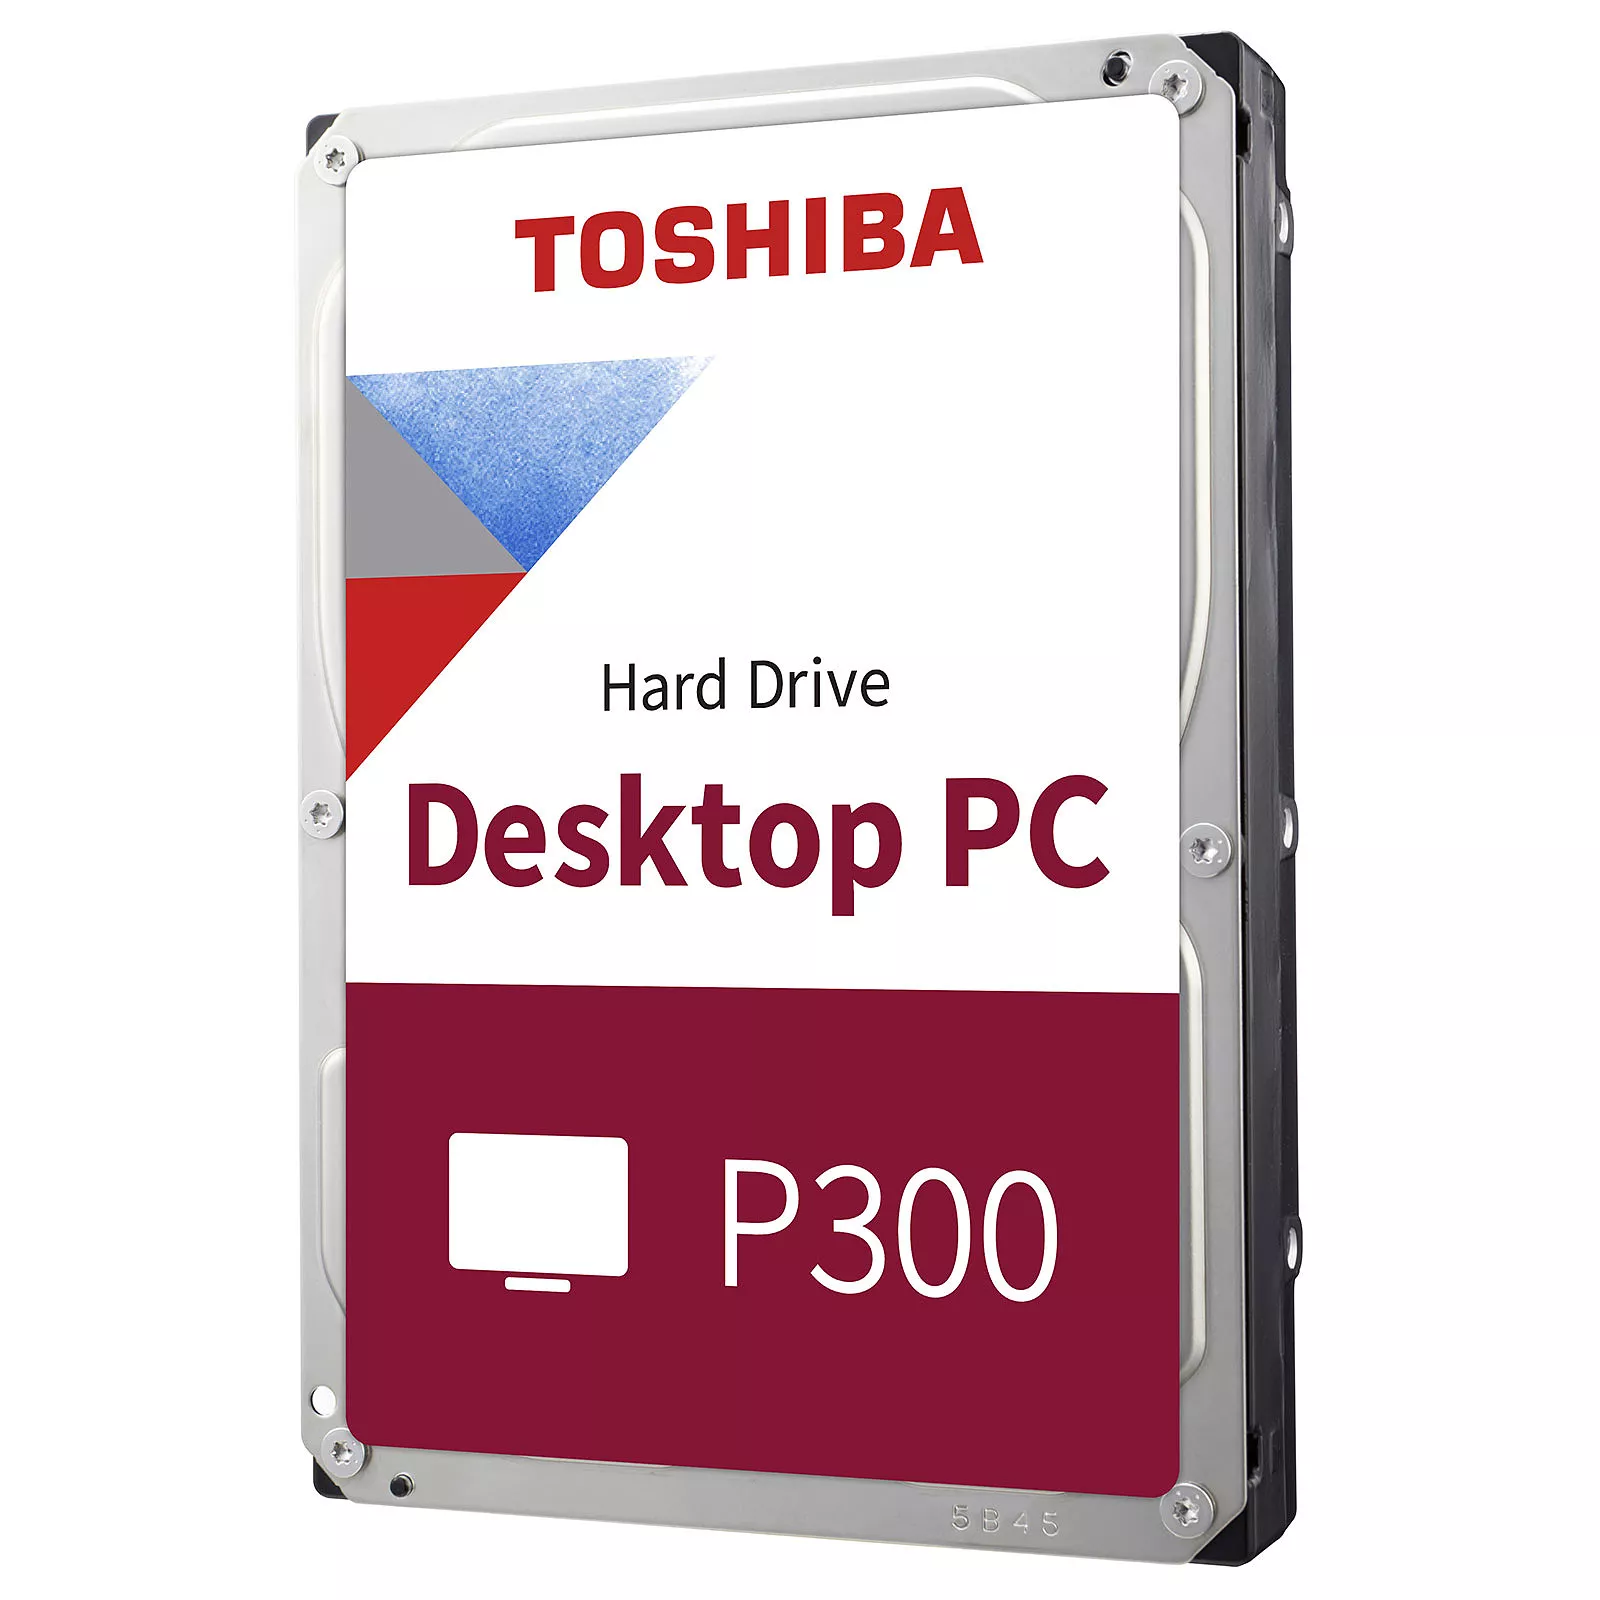 HDD TOSHIBA P300 3.5" 1To 7200RPM 64MB CACHE